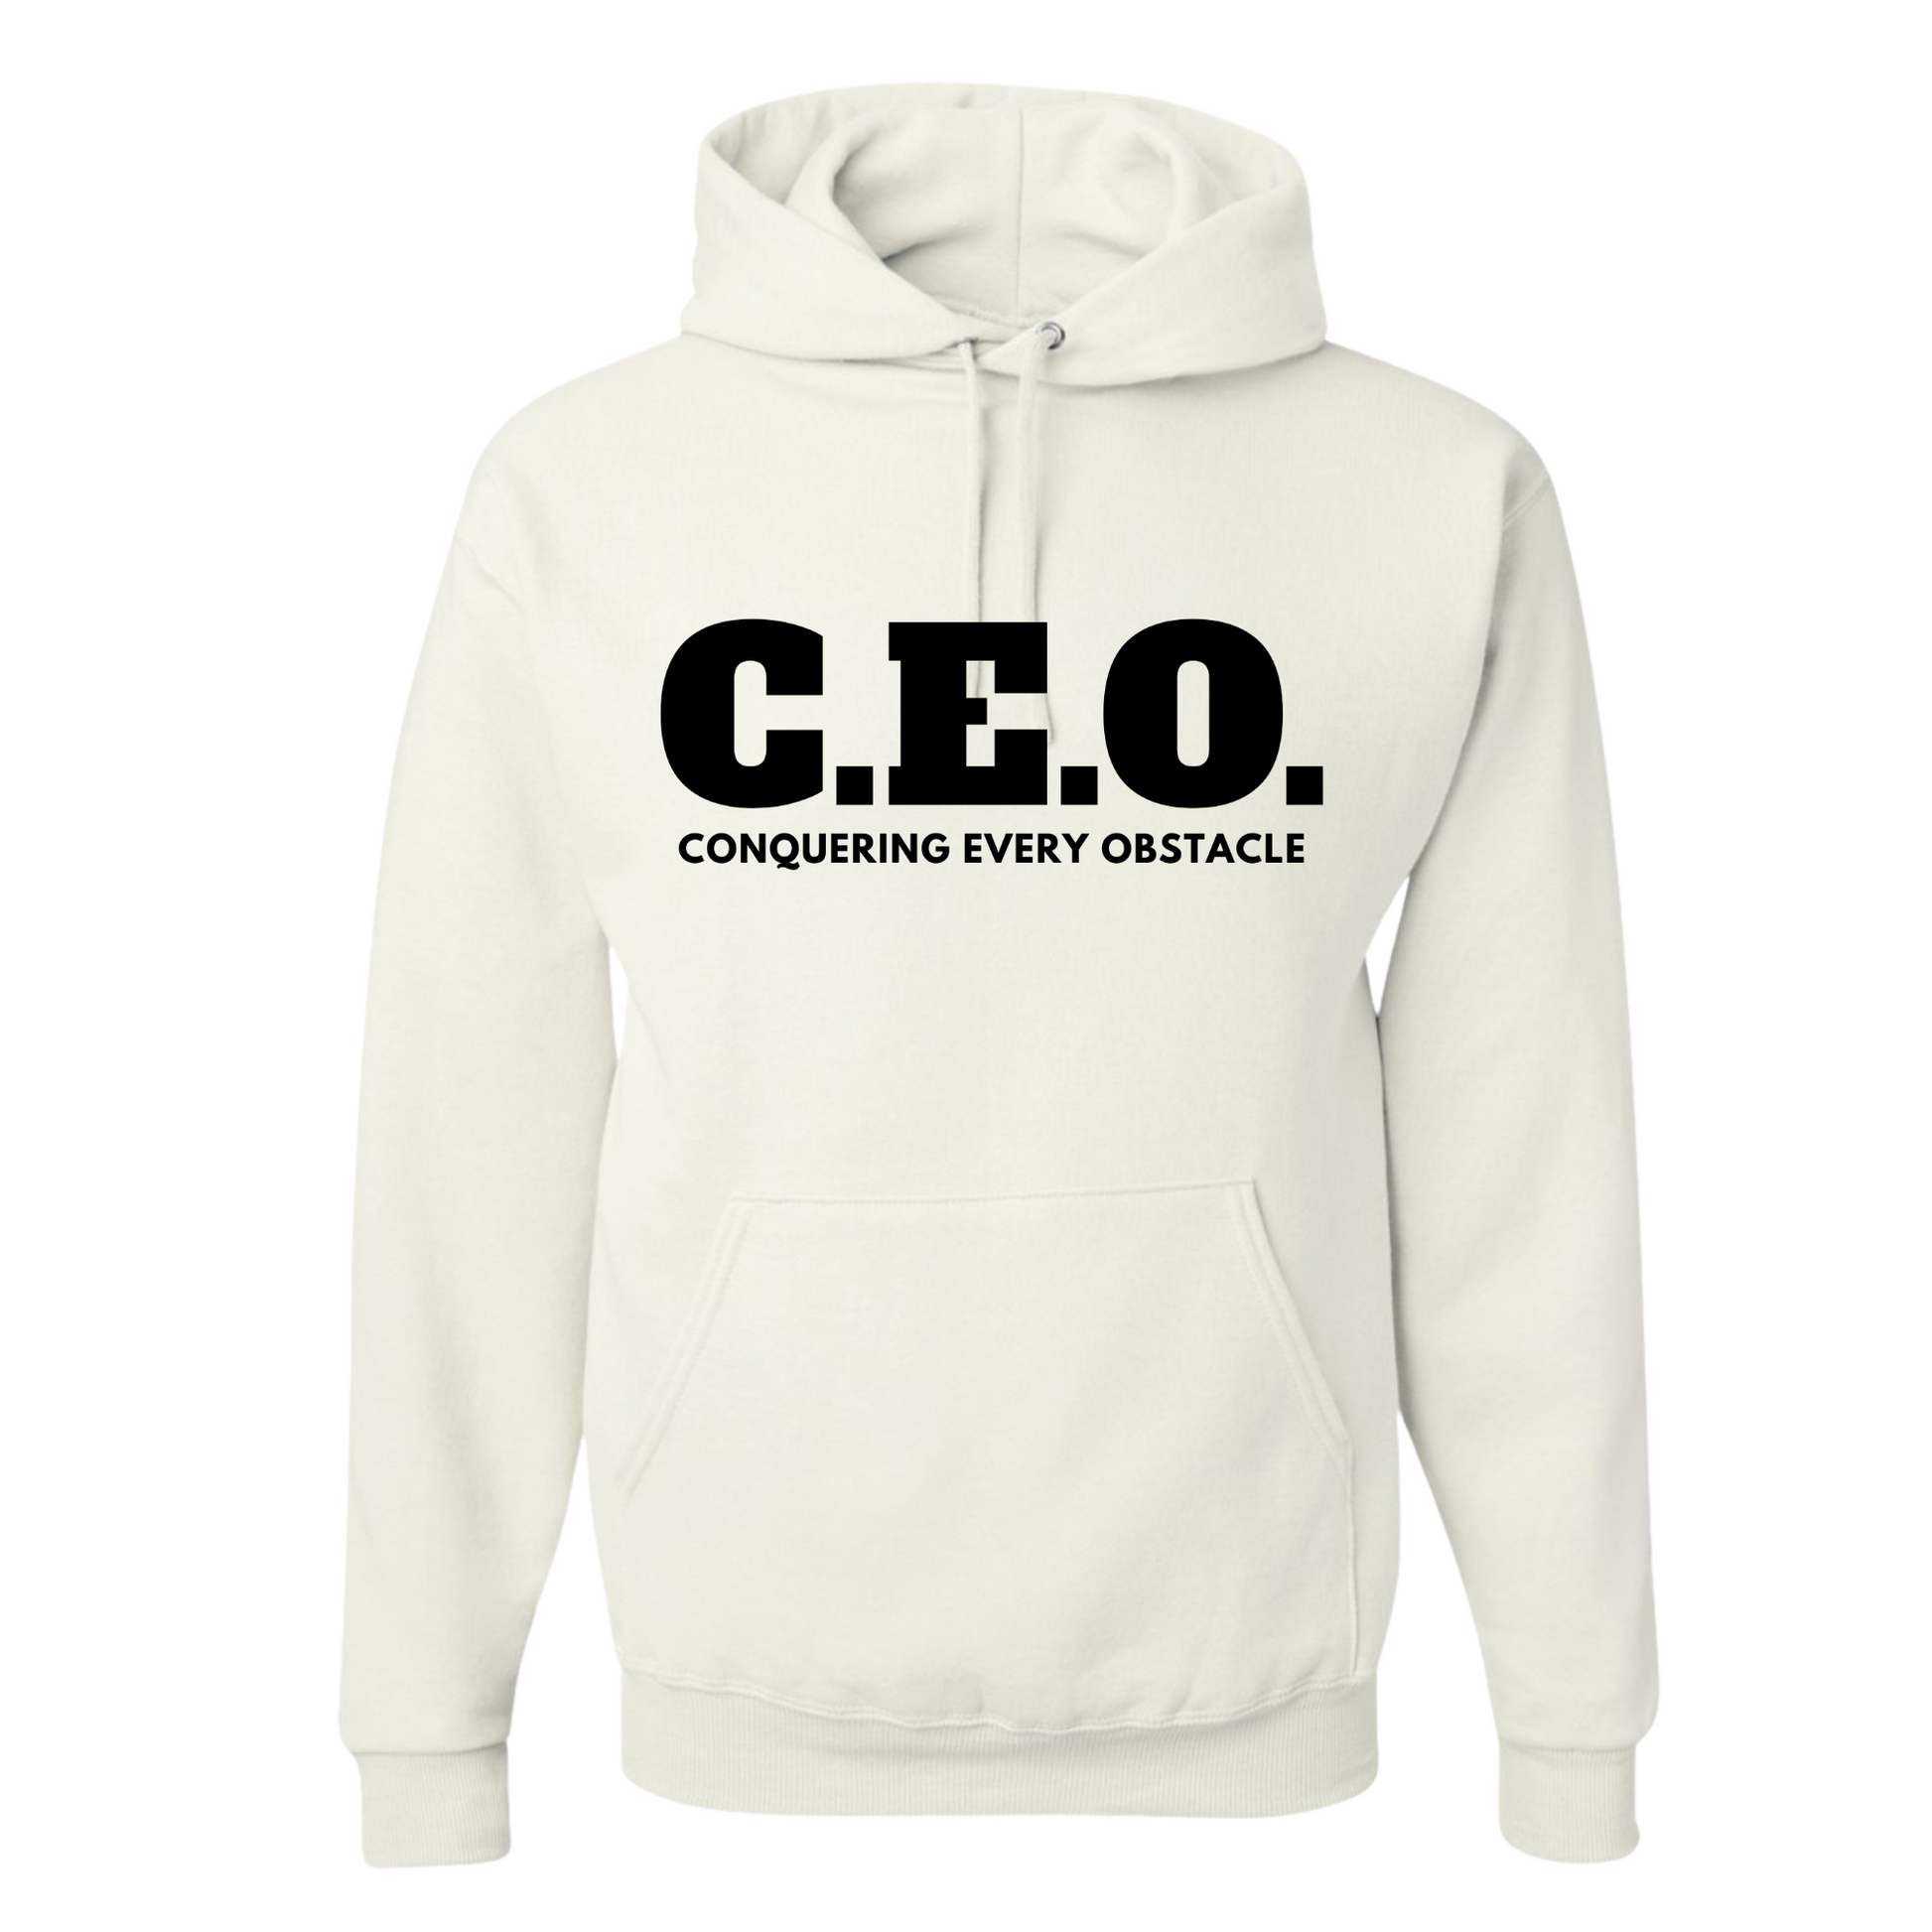 C.E.O. (Conquering Every Obstacle) Hooded Sweatshirt